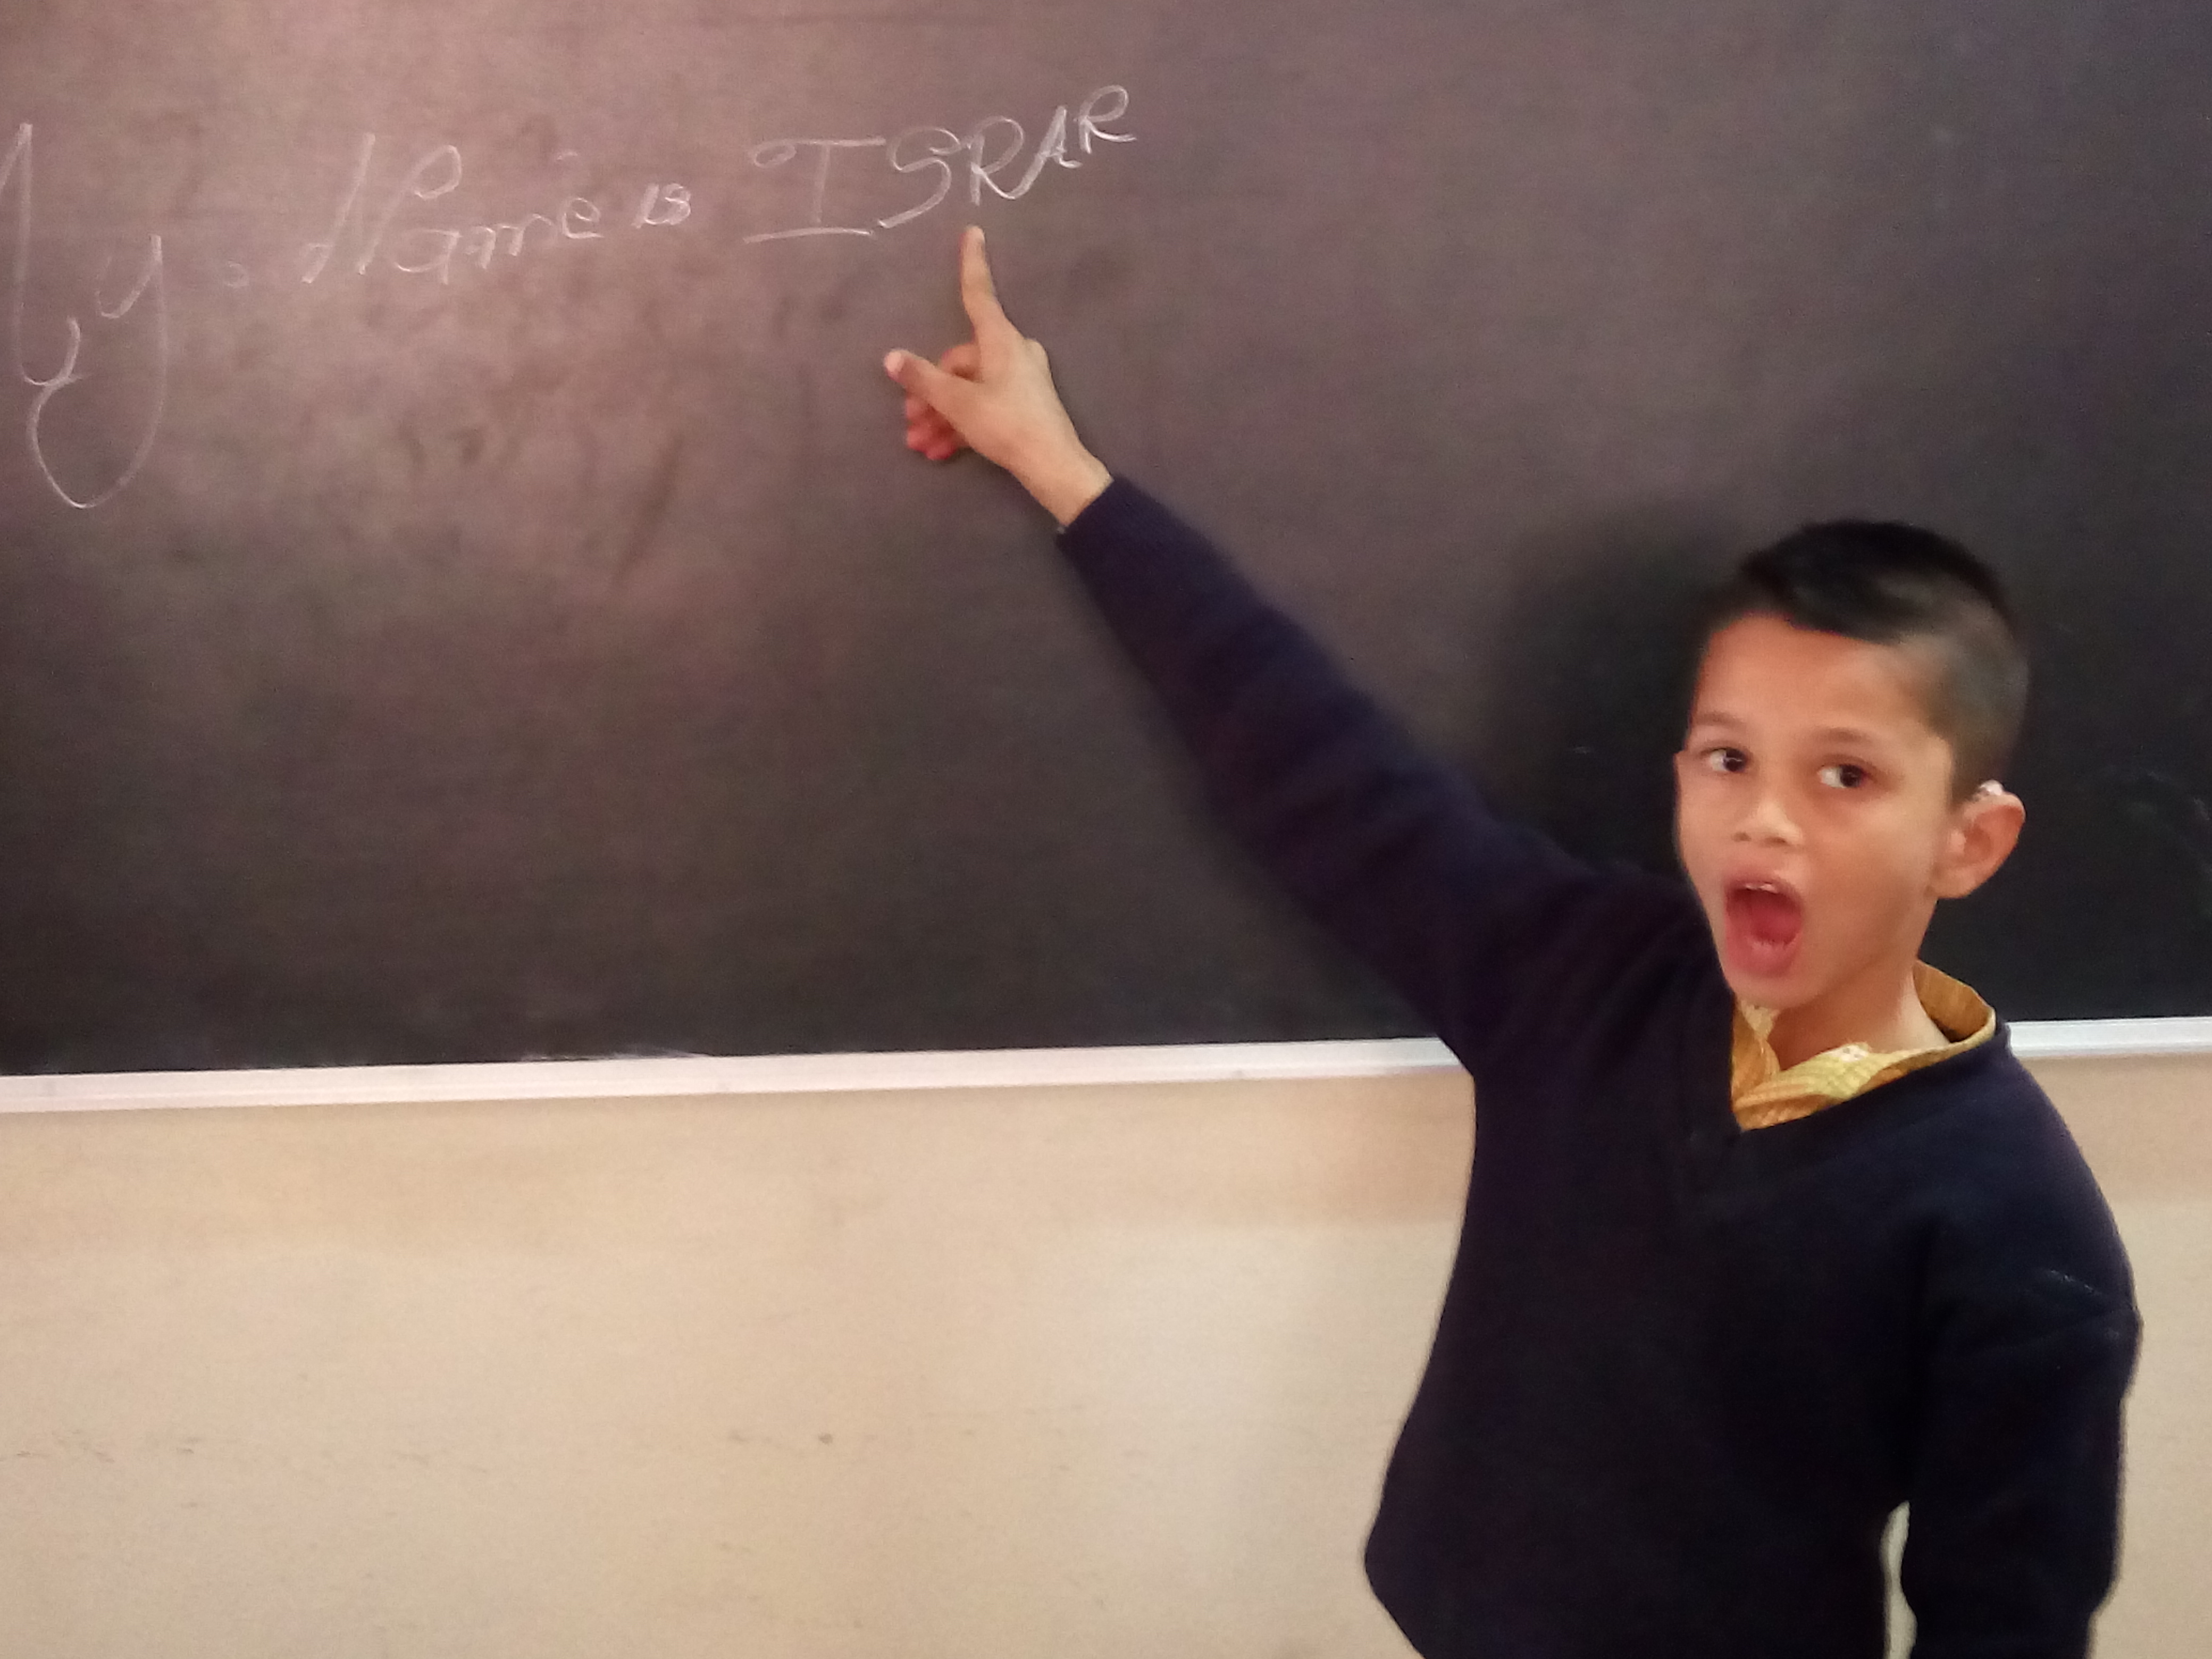 Hearing Impaired child writing his name